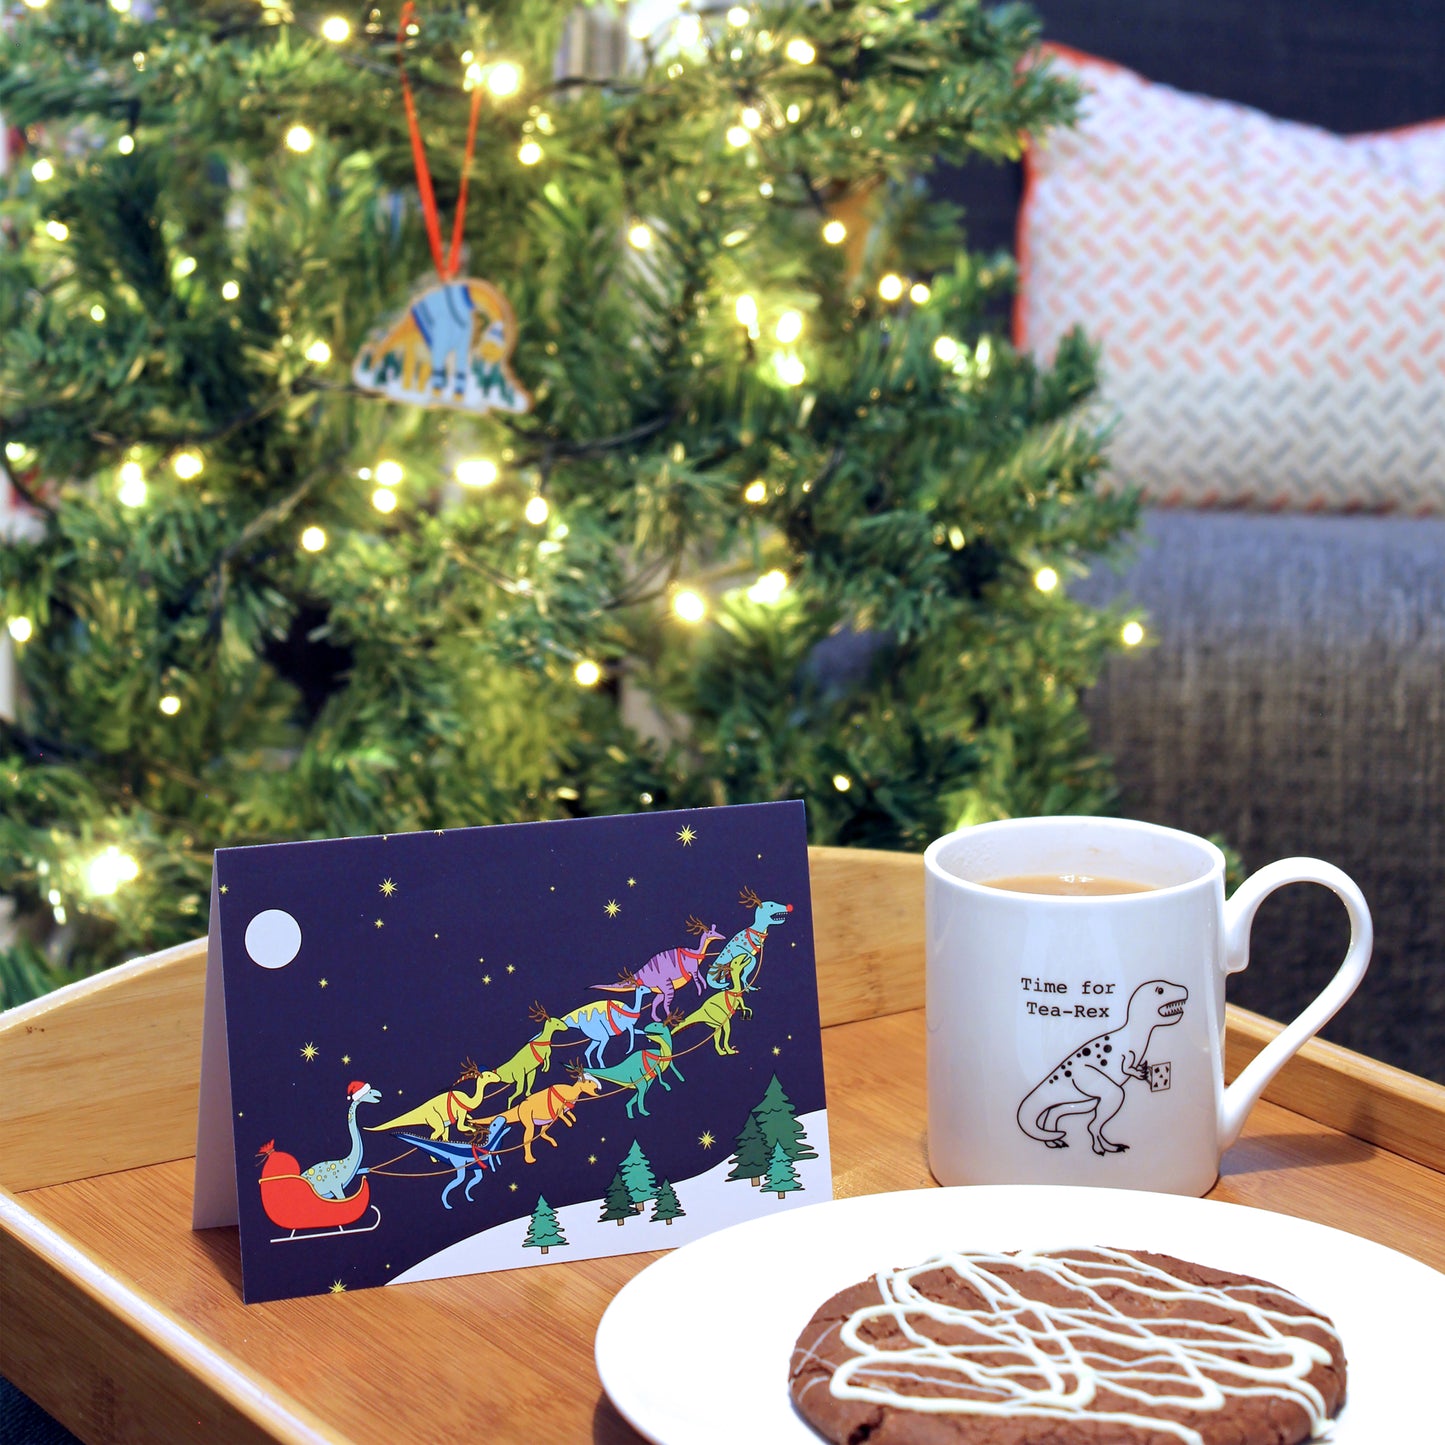 Santa's sleigh dinosaur Christmas card on a tray with tea and a cookie. There is a Christmas tree in the backgorund